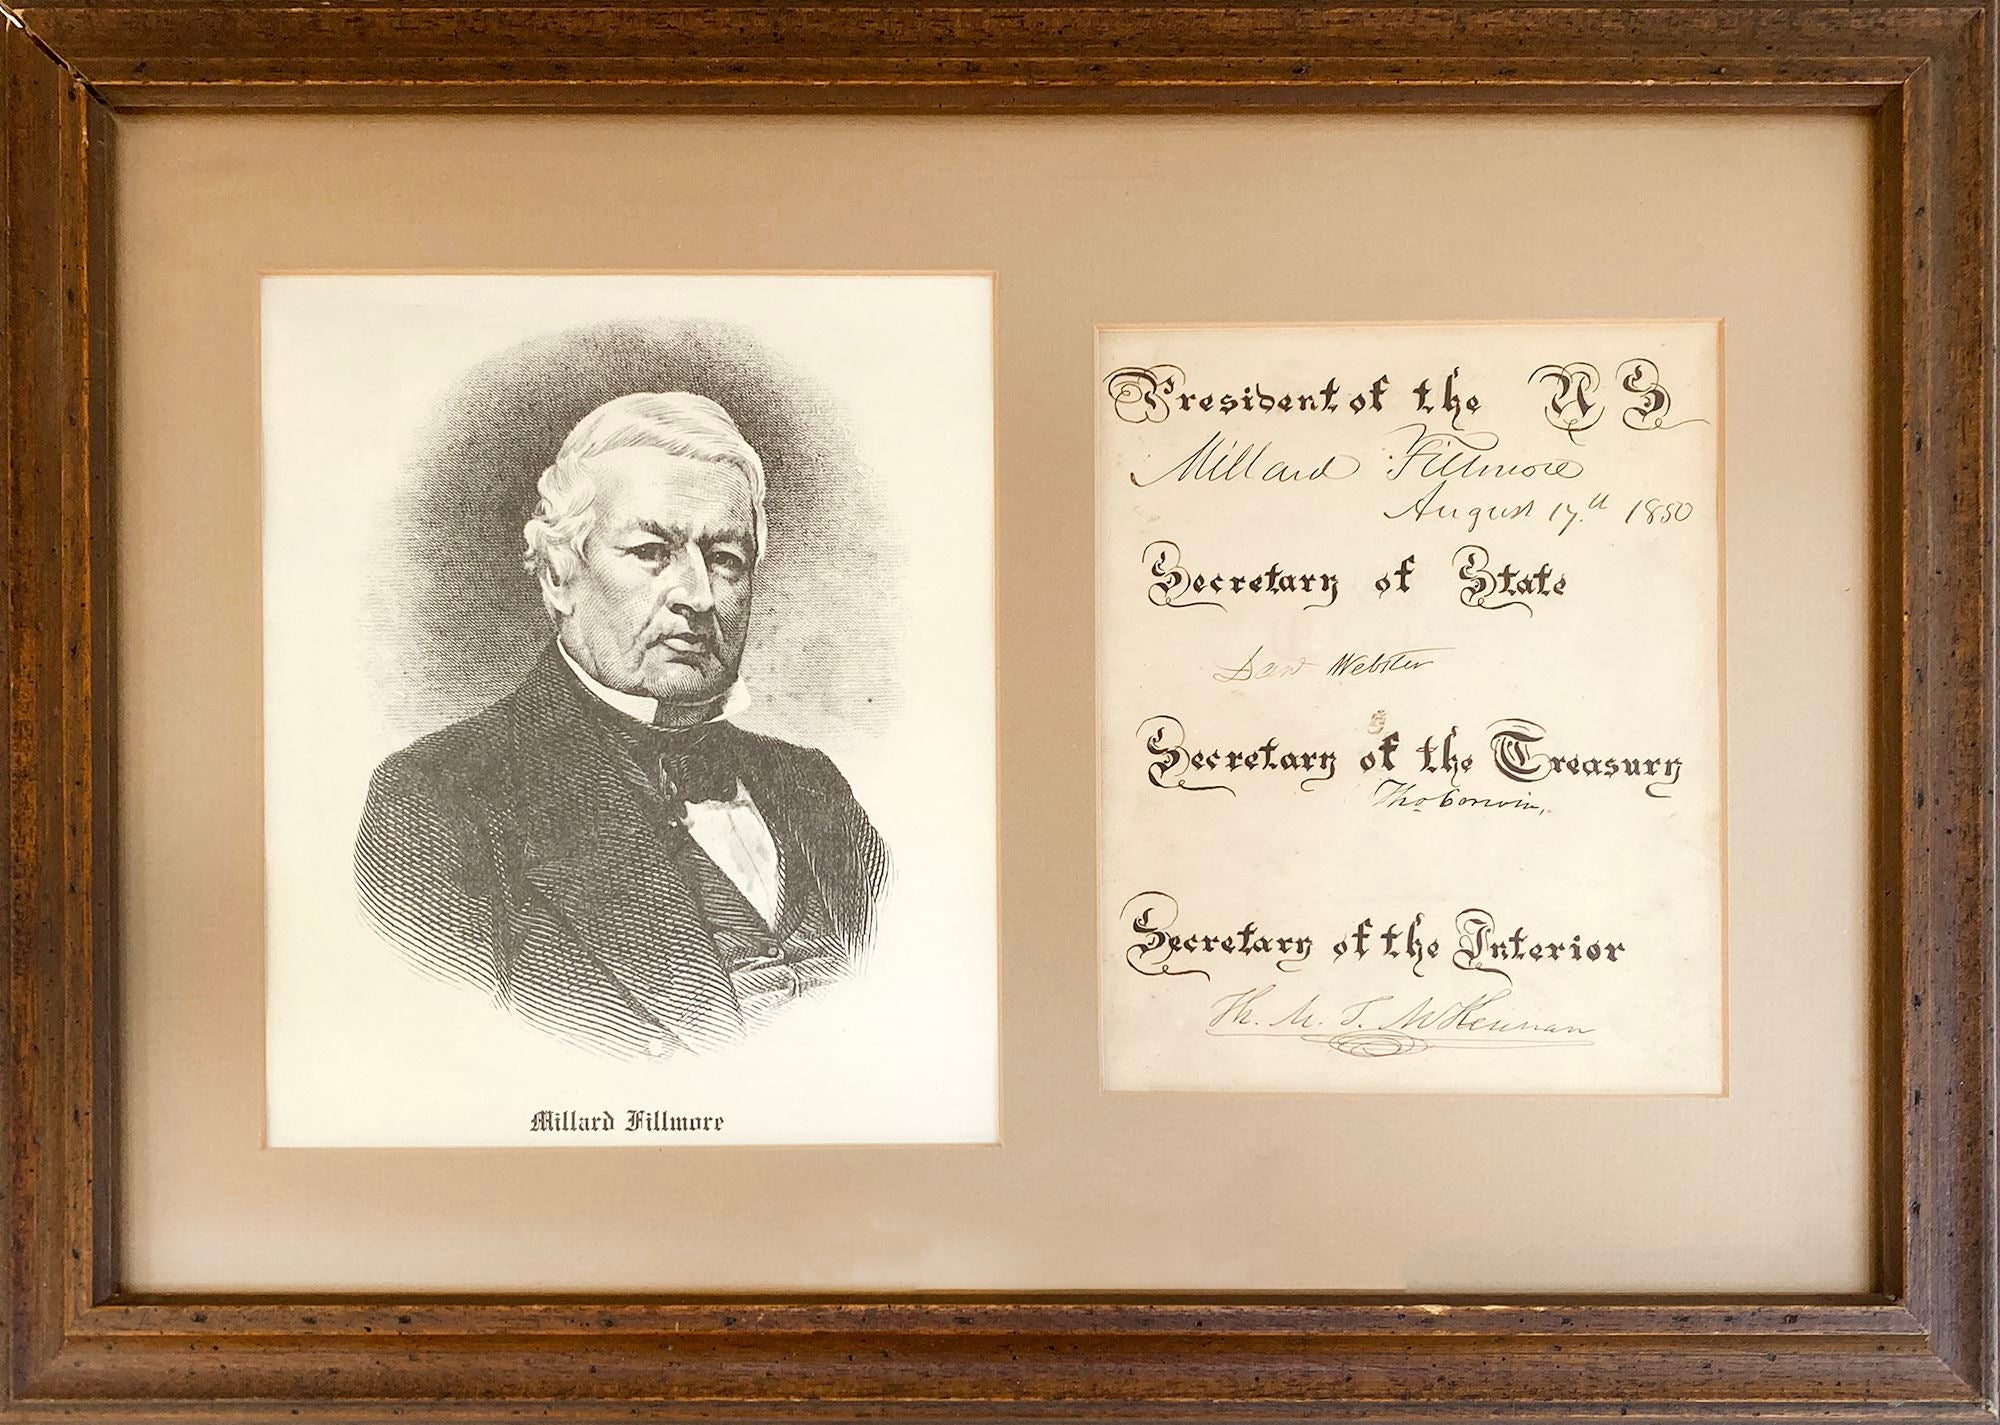 MILLARD FILLMORE - 13TH U.S. PRESIDENT - ALBUM PAGE AUTOGRAPHED BY PRESIDENT & 3 CABINET MEMBERS